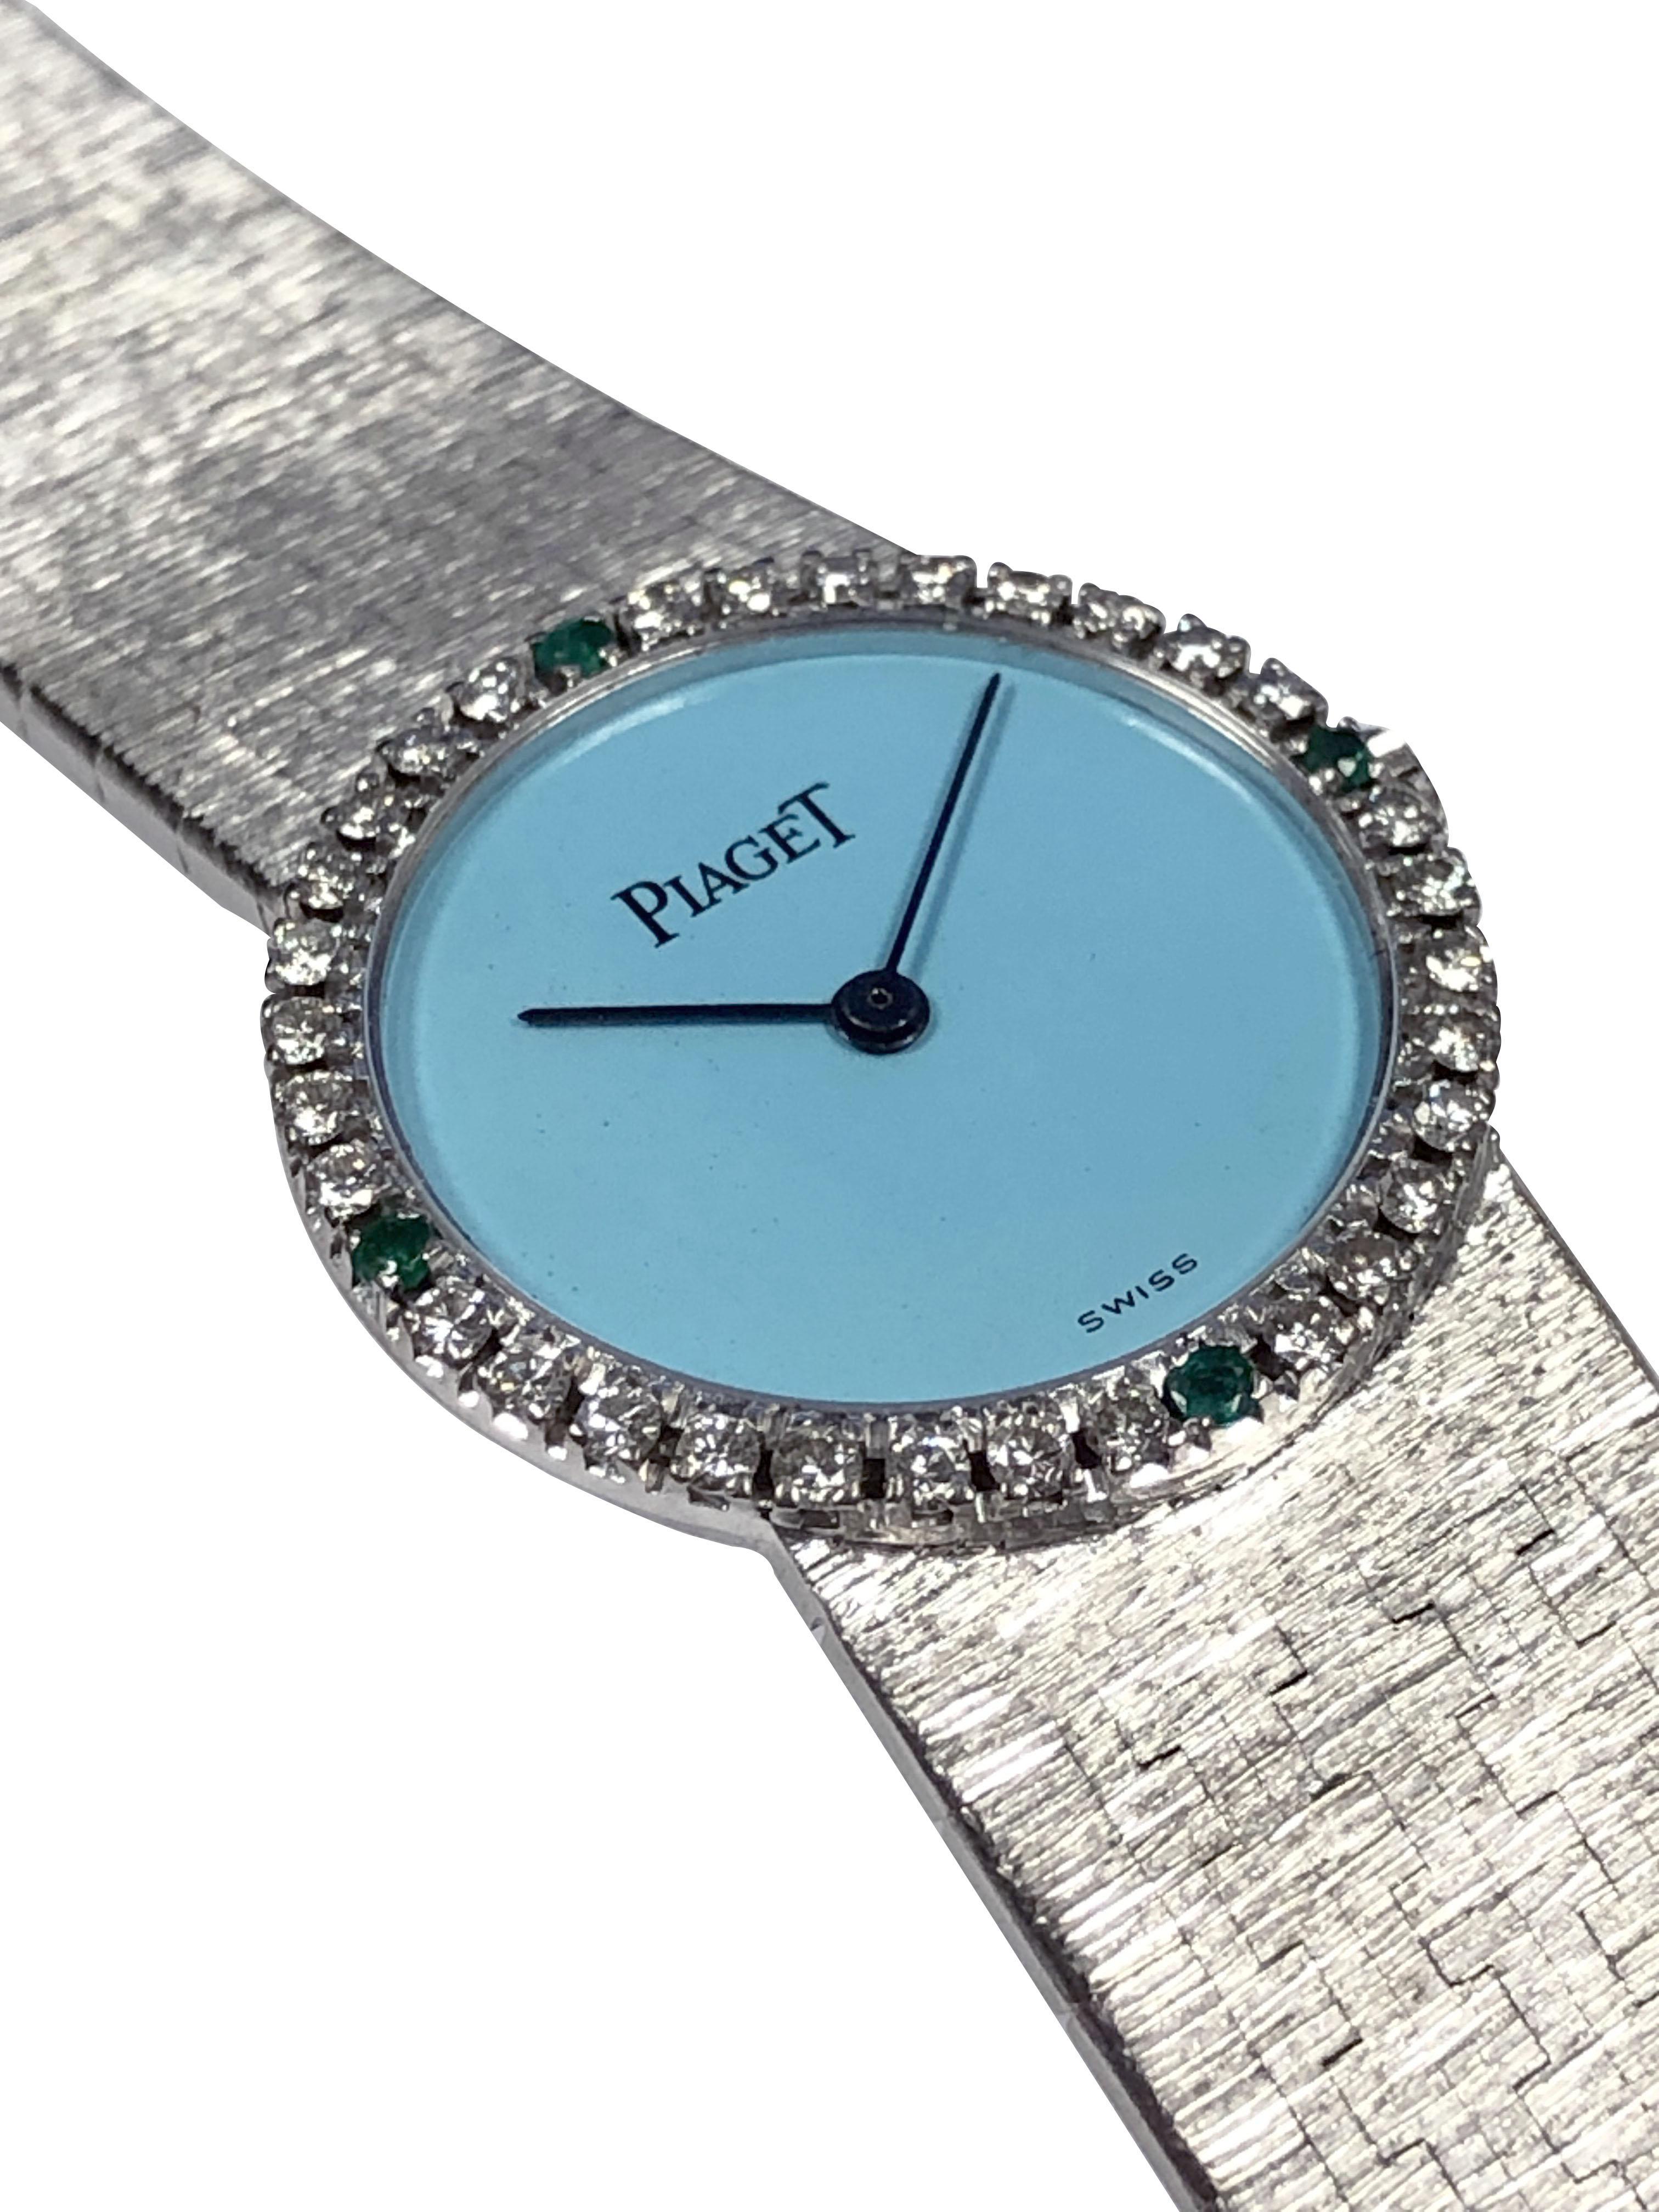 Circa 1970 Piaget Wrist Watch, 24 M.M. 18k White Gold 2 piece case with a Diamond and Emerald set bezel. Mechanical, Manual wind movement, Turquoise Dial. 5/8 inch wide Integrated mesh link textured bracelet.  Wrist size 6 1/2 inches. Recently